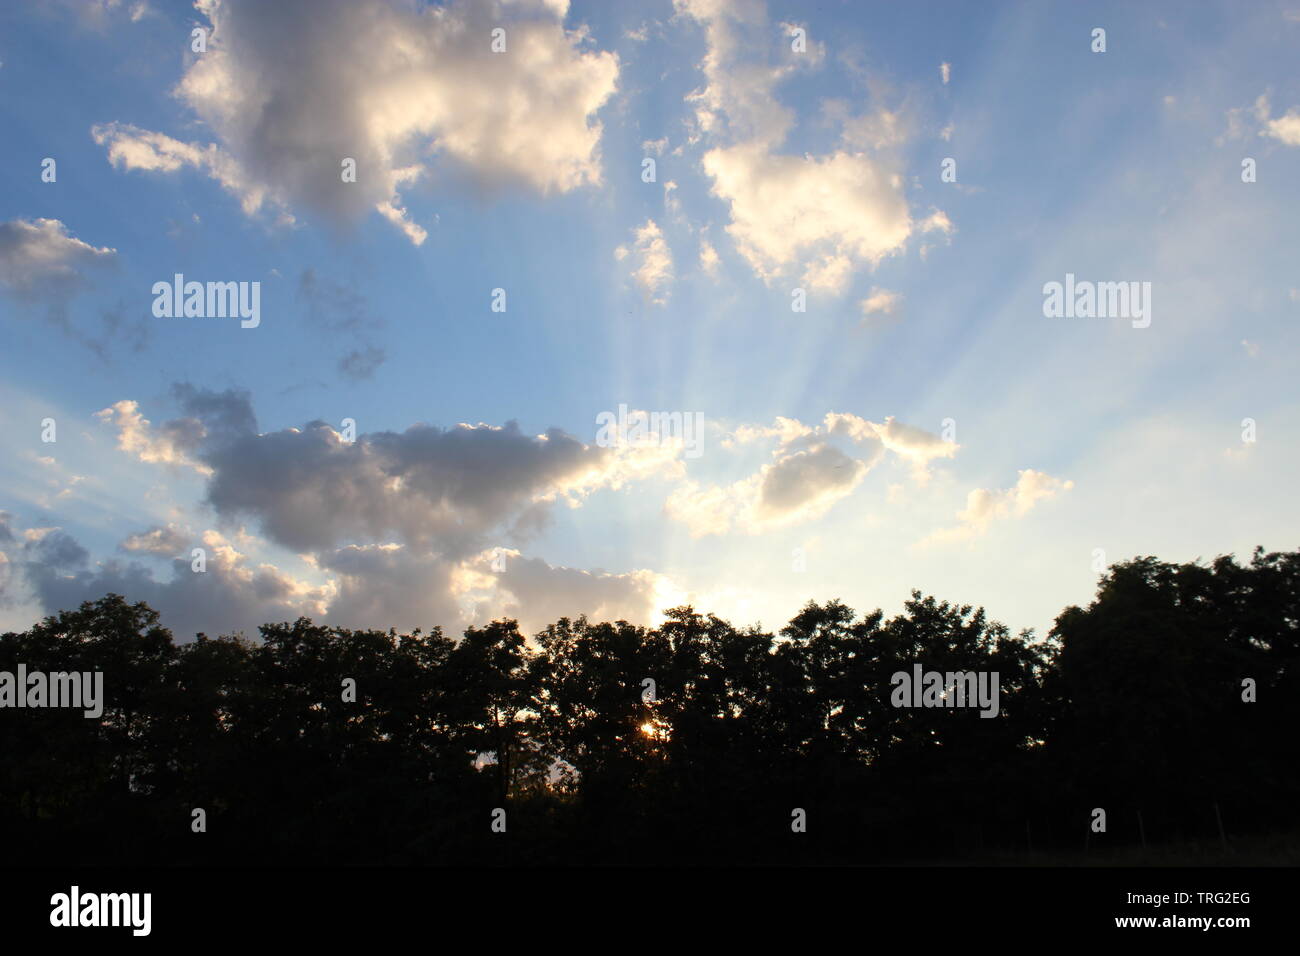 Blue skyline with sun rays and black trees, a new beginning Stock Photo